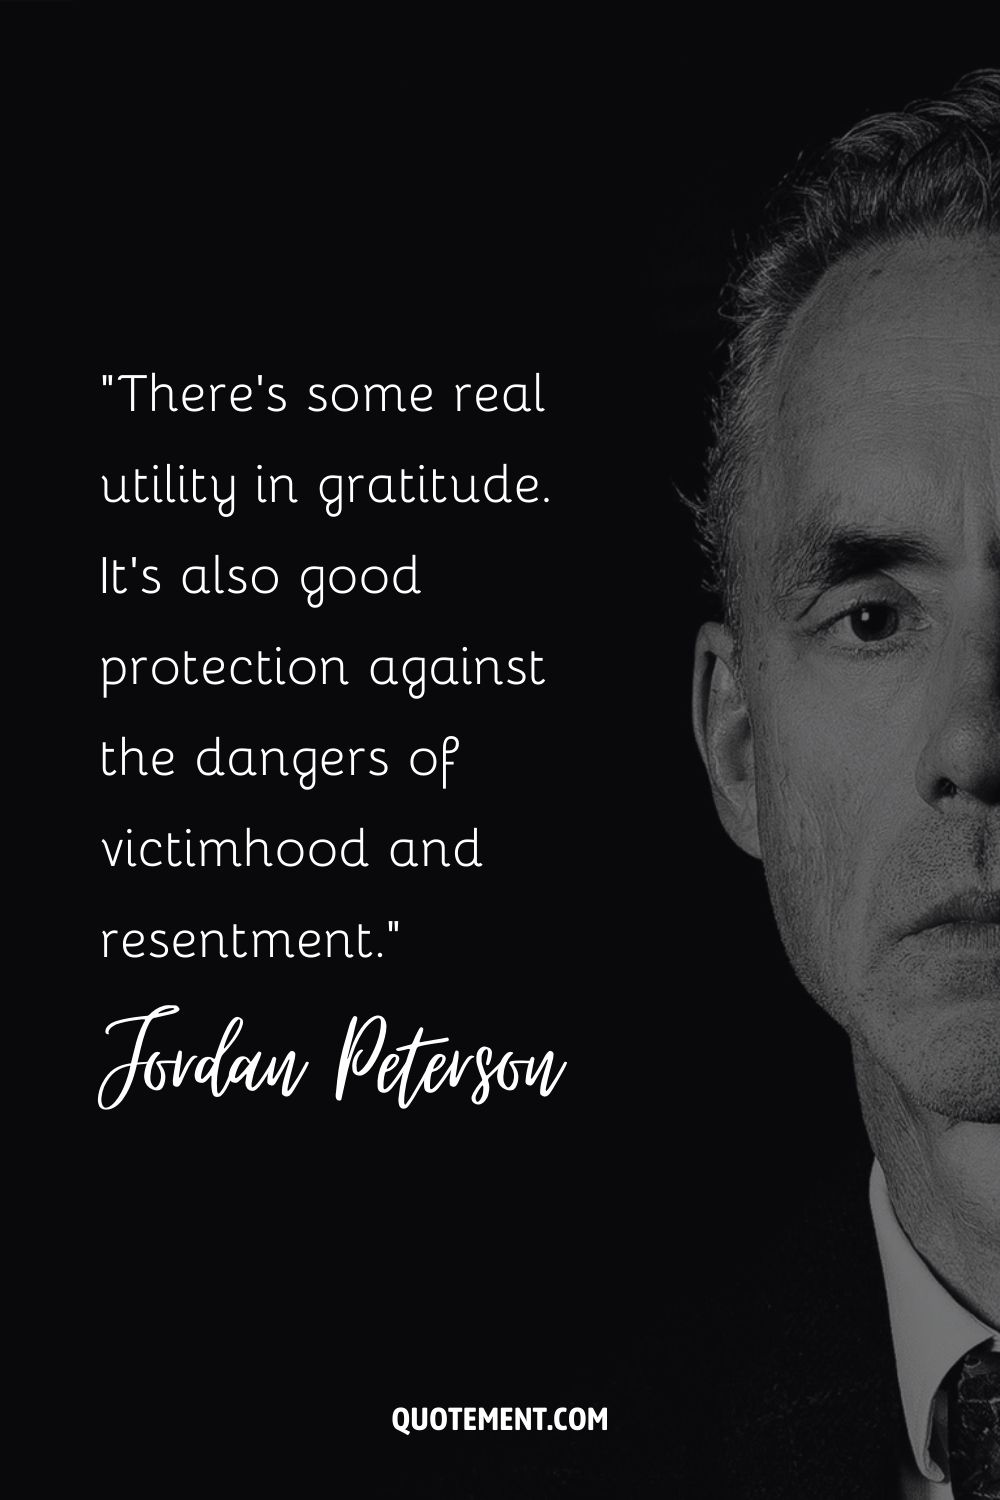 There’s some real utility in gratitude. It’s also good protection against the dangers of victimhood and resentment